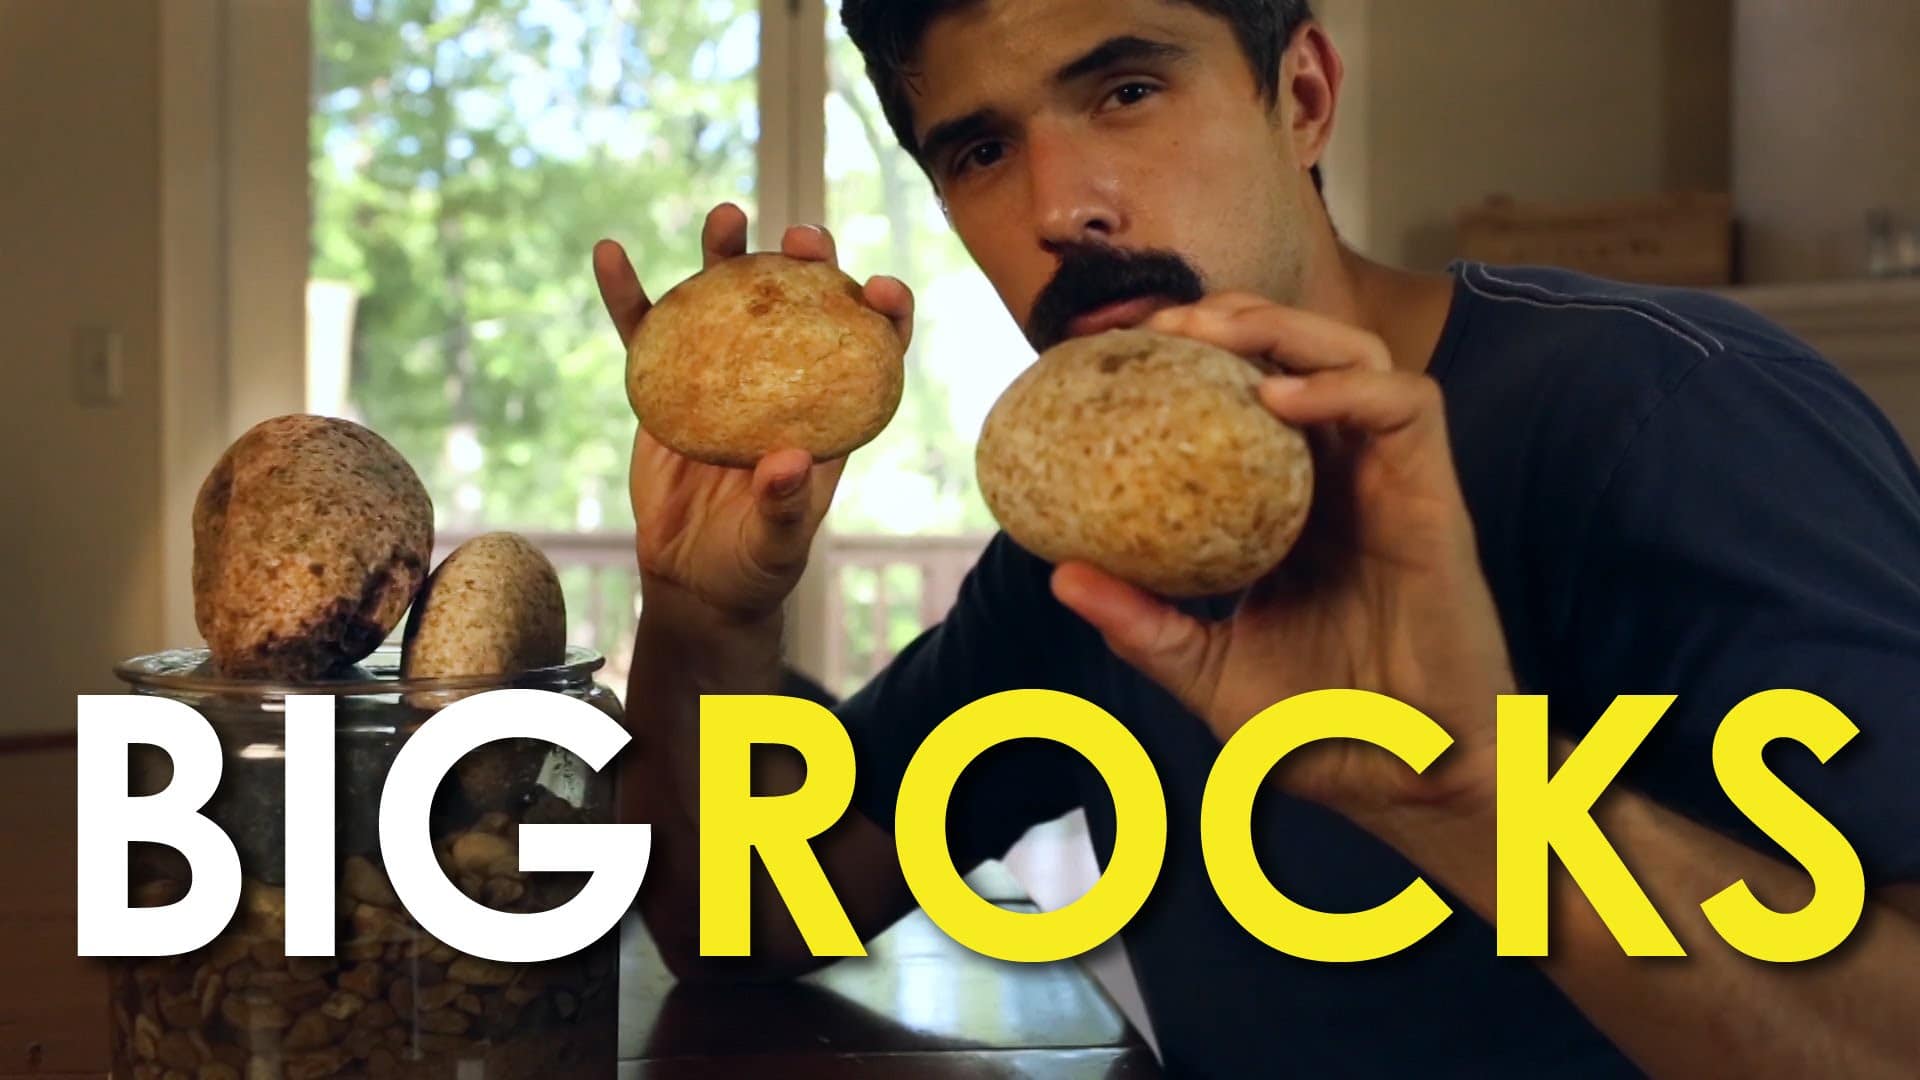 In the video, a man is holding a big rock in front of a table.